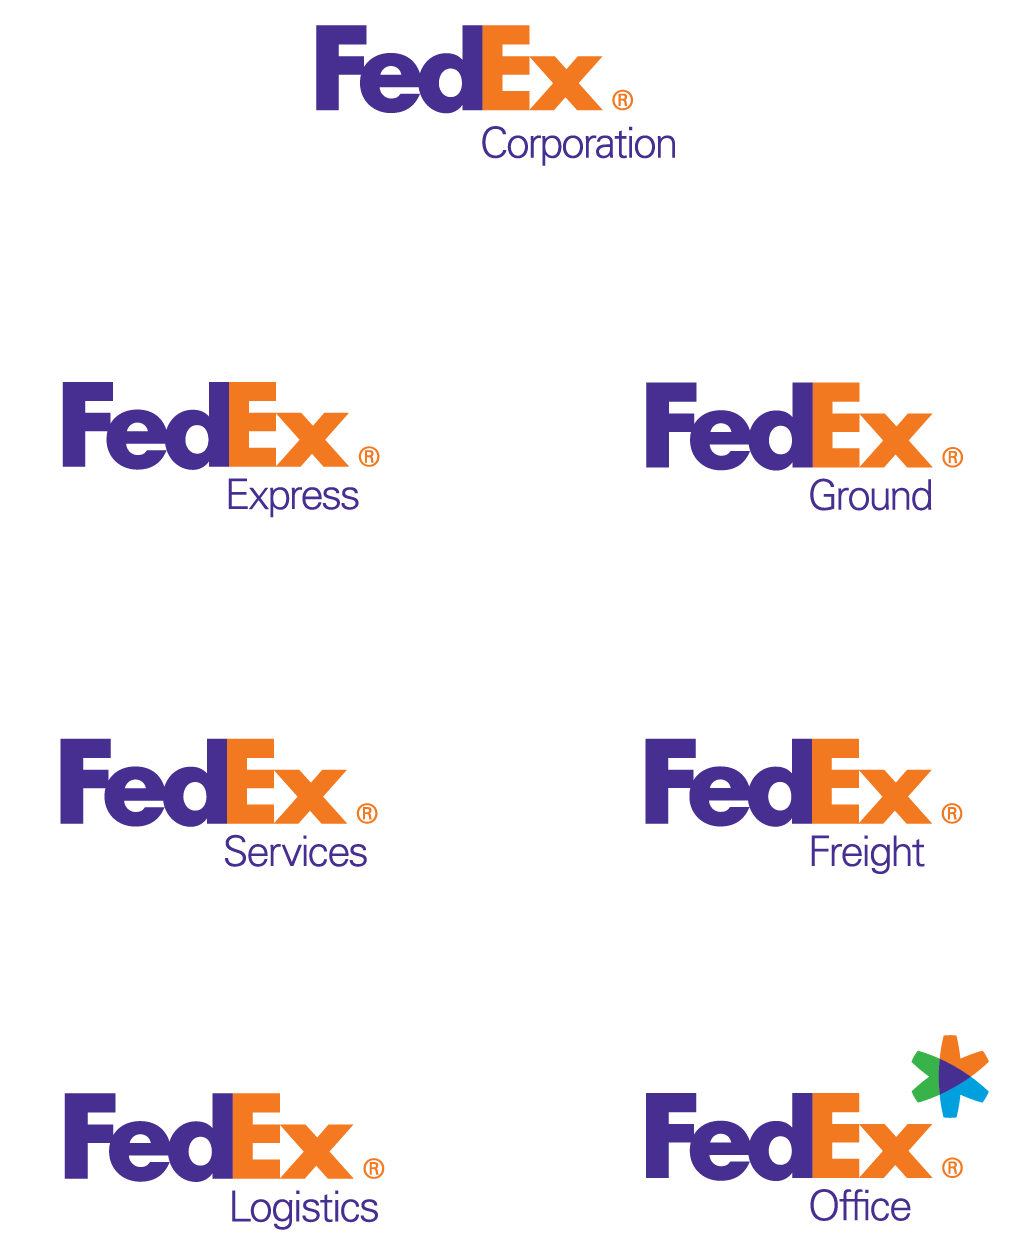 FedEx Ex Logo - Company Structure and Facts - About FedEx